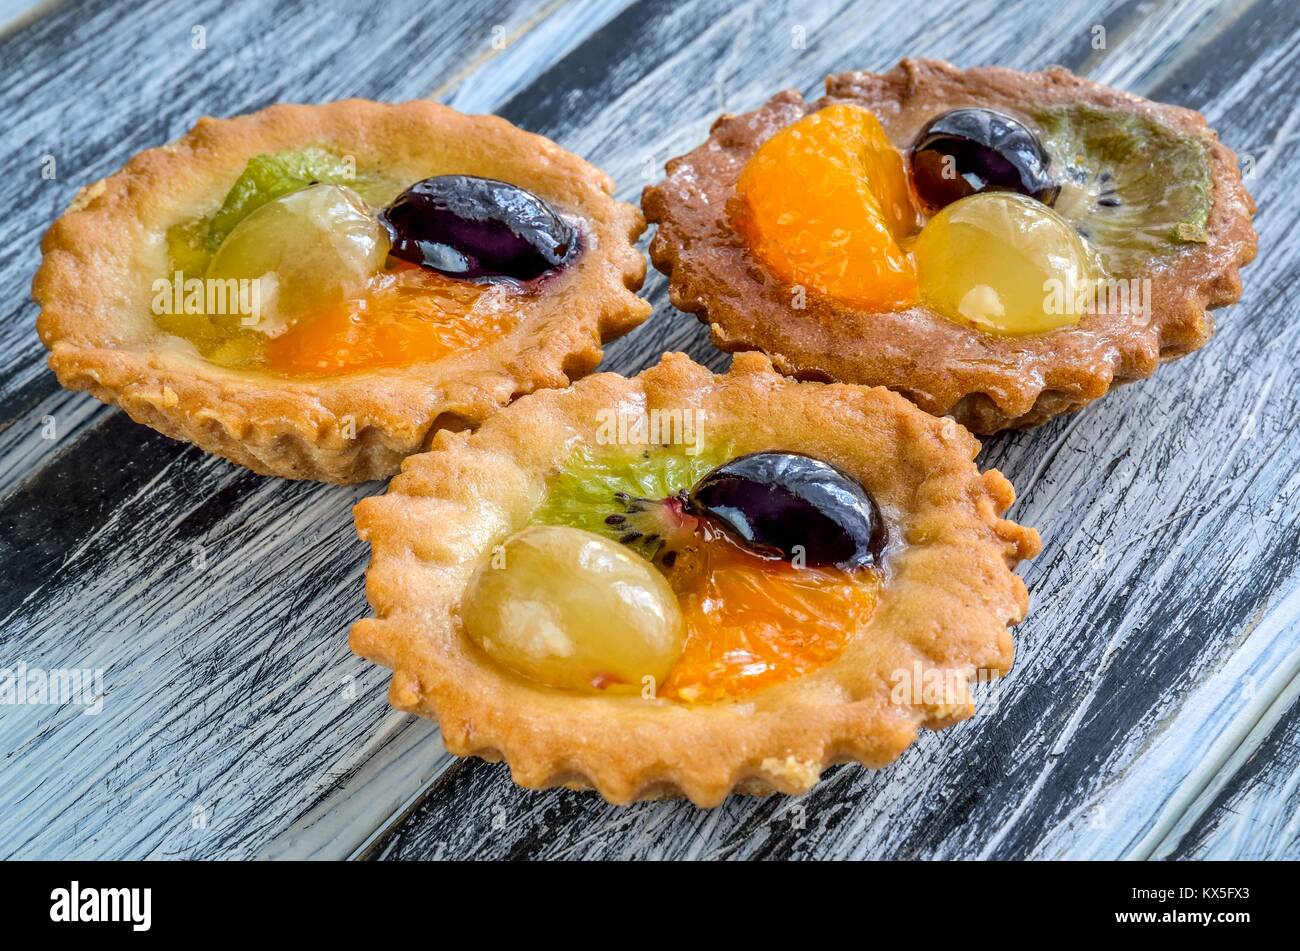 Sweet delicious meal. Muffins with colorful and fresh fruits. Stock Photo